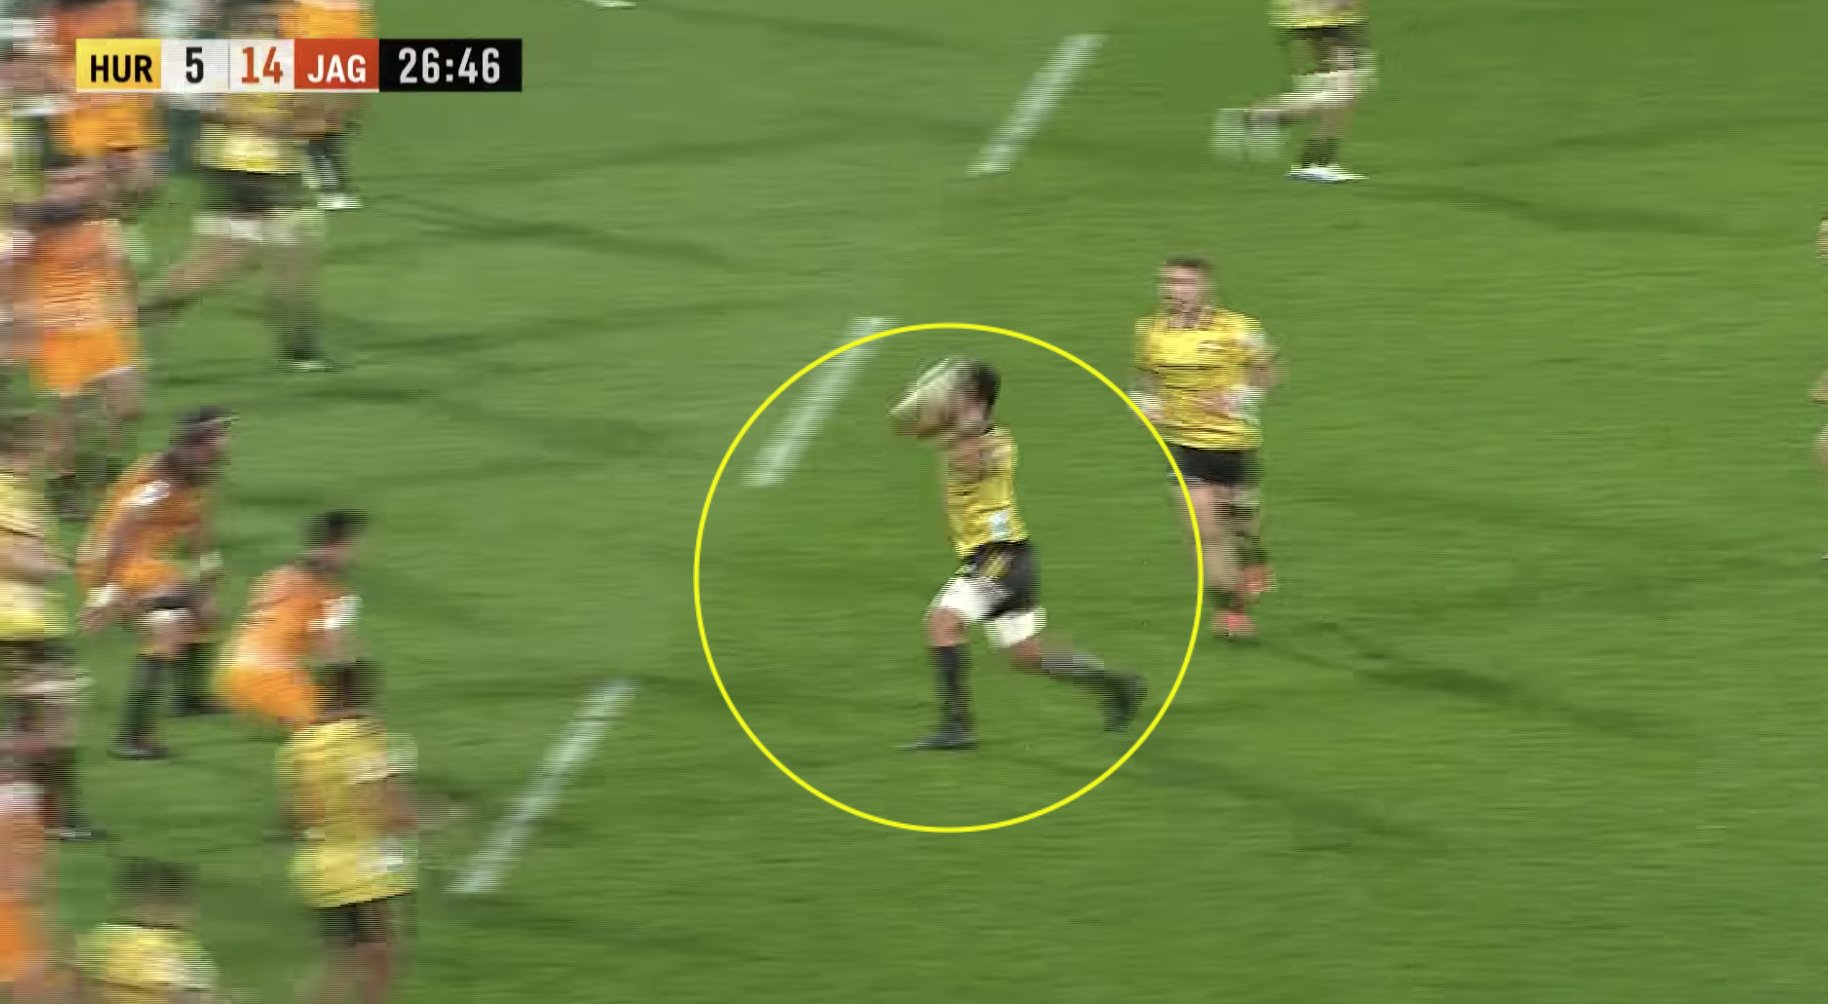 VIDEO: Ardie Savea throws one of the worst dummy passes in rugby history, AND IT WORKED